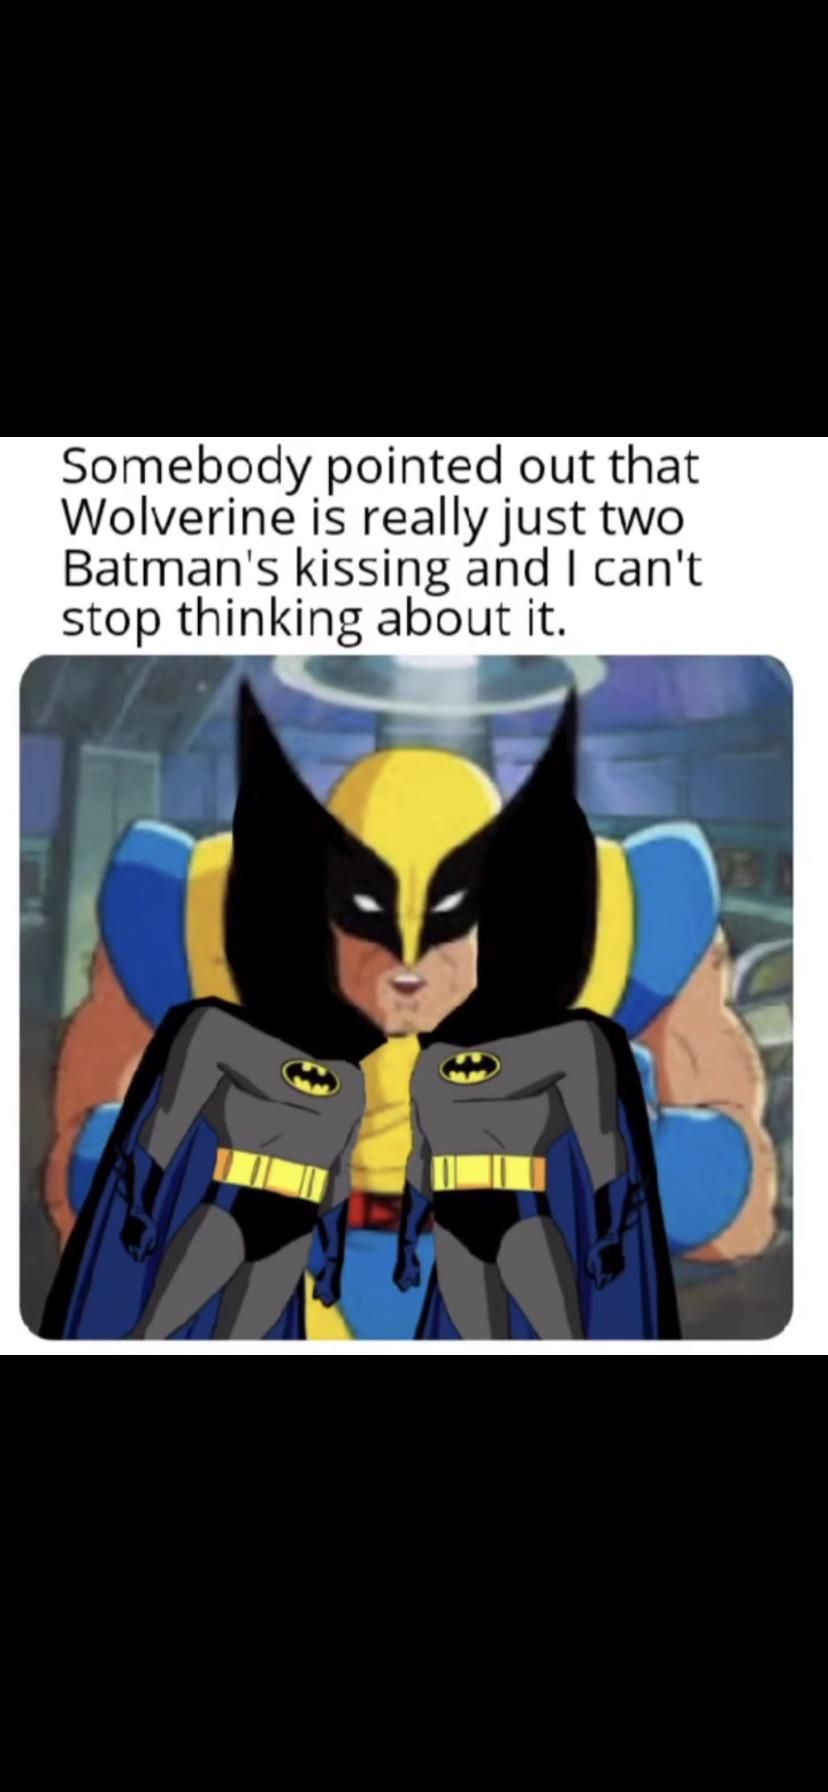 I’ll never see wolverine the same...